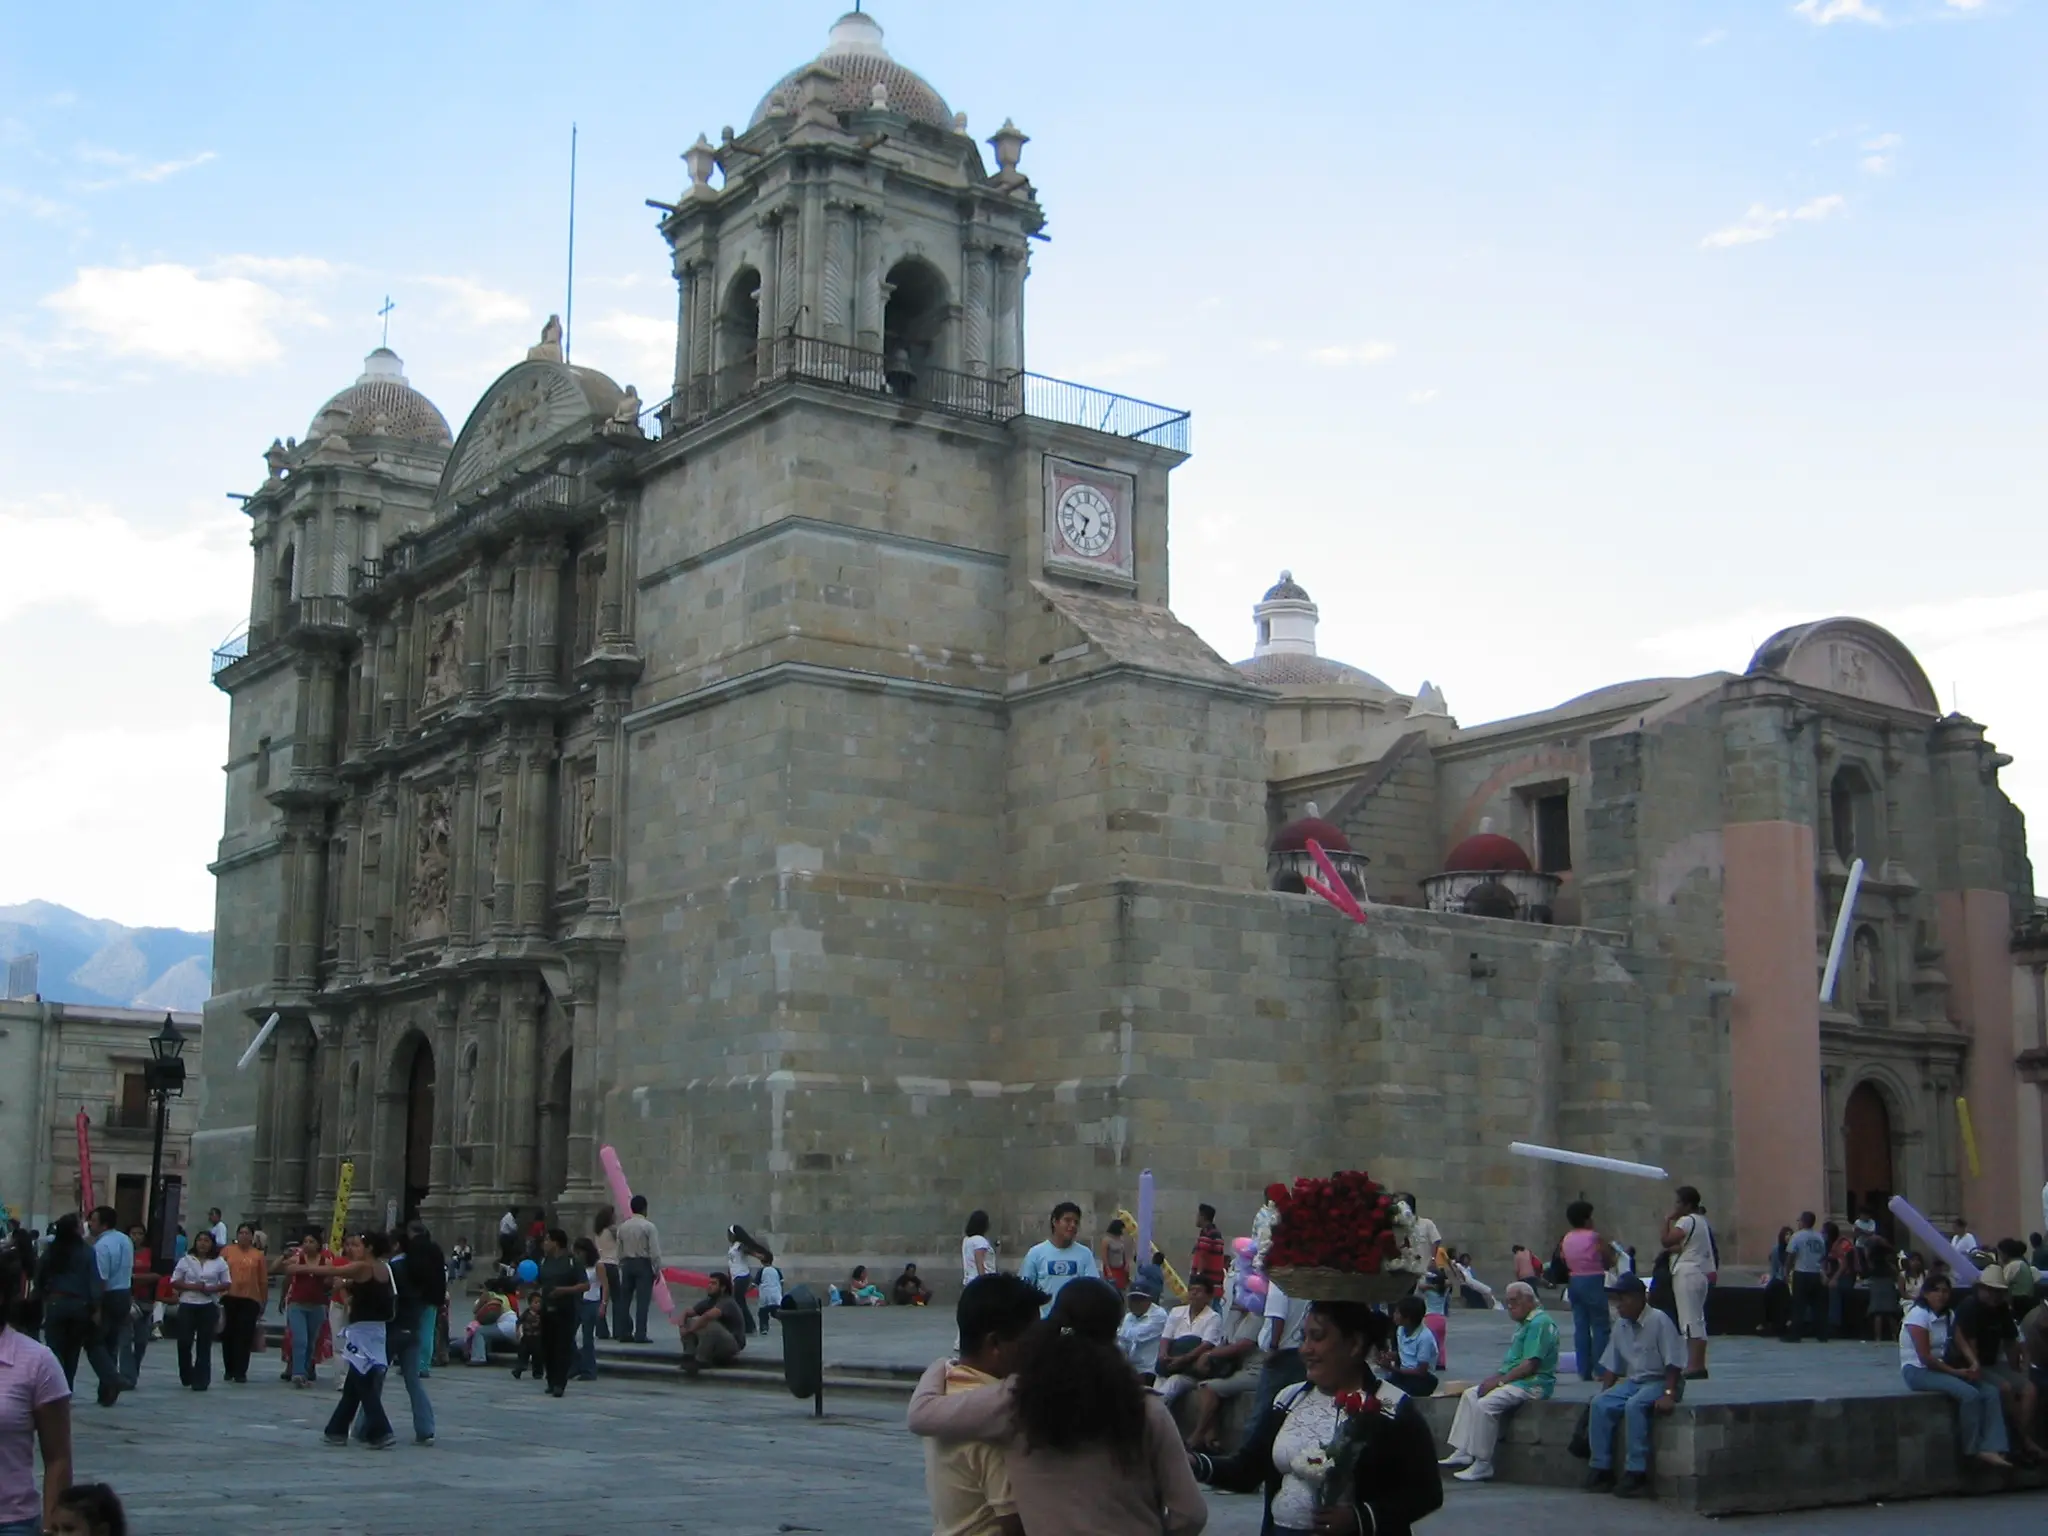 Zocalo and the Oaxaca Cathedral